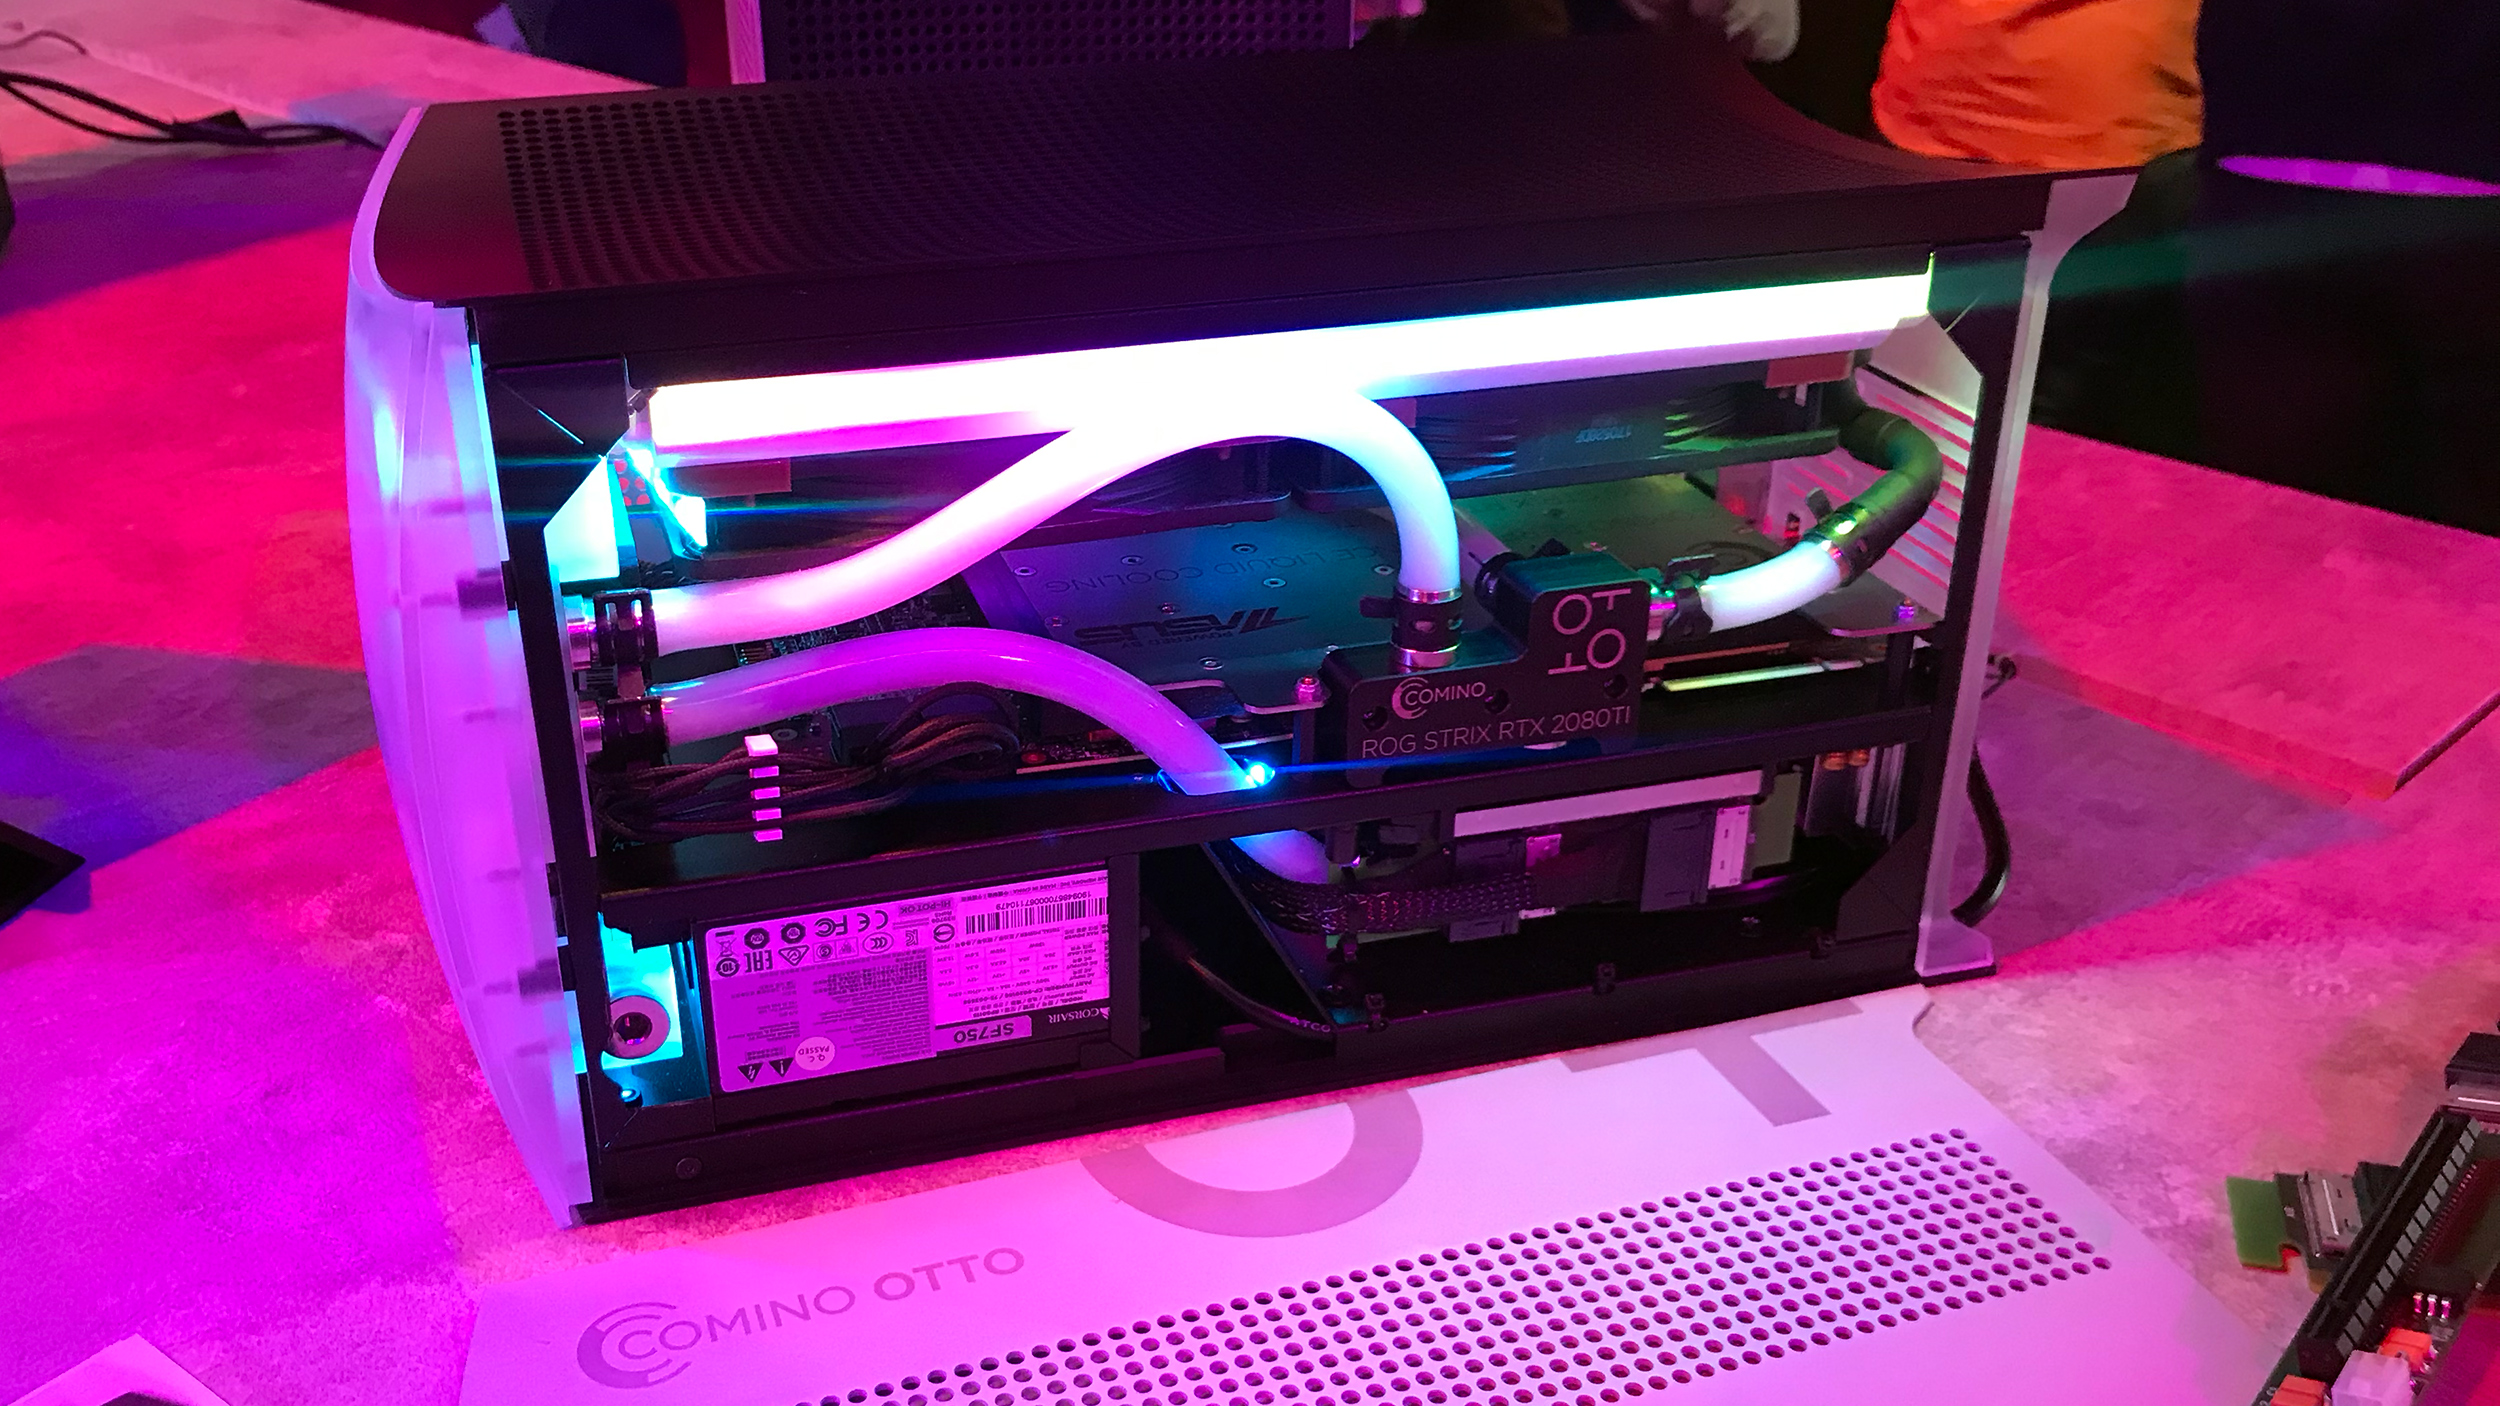 From Mining to Mini-PC Gaming: Comino Goes High-End Gaming PCs